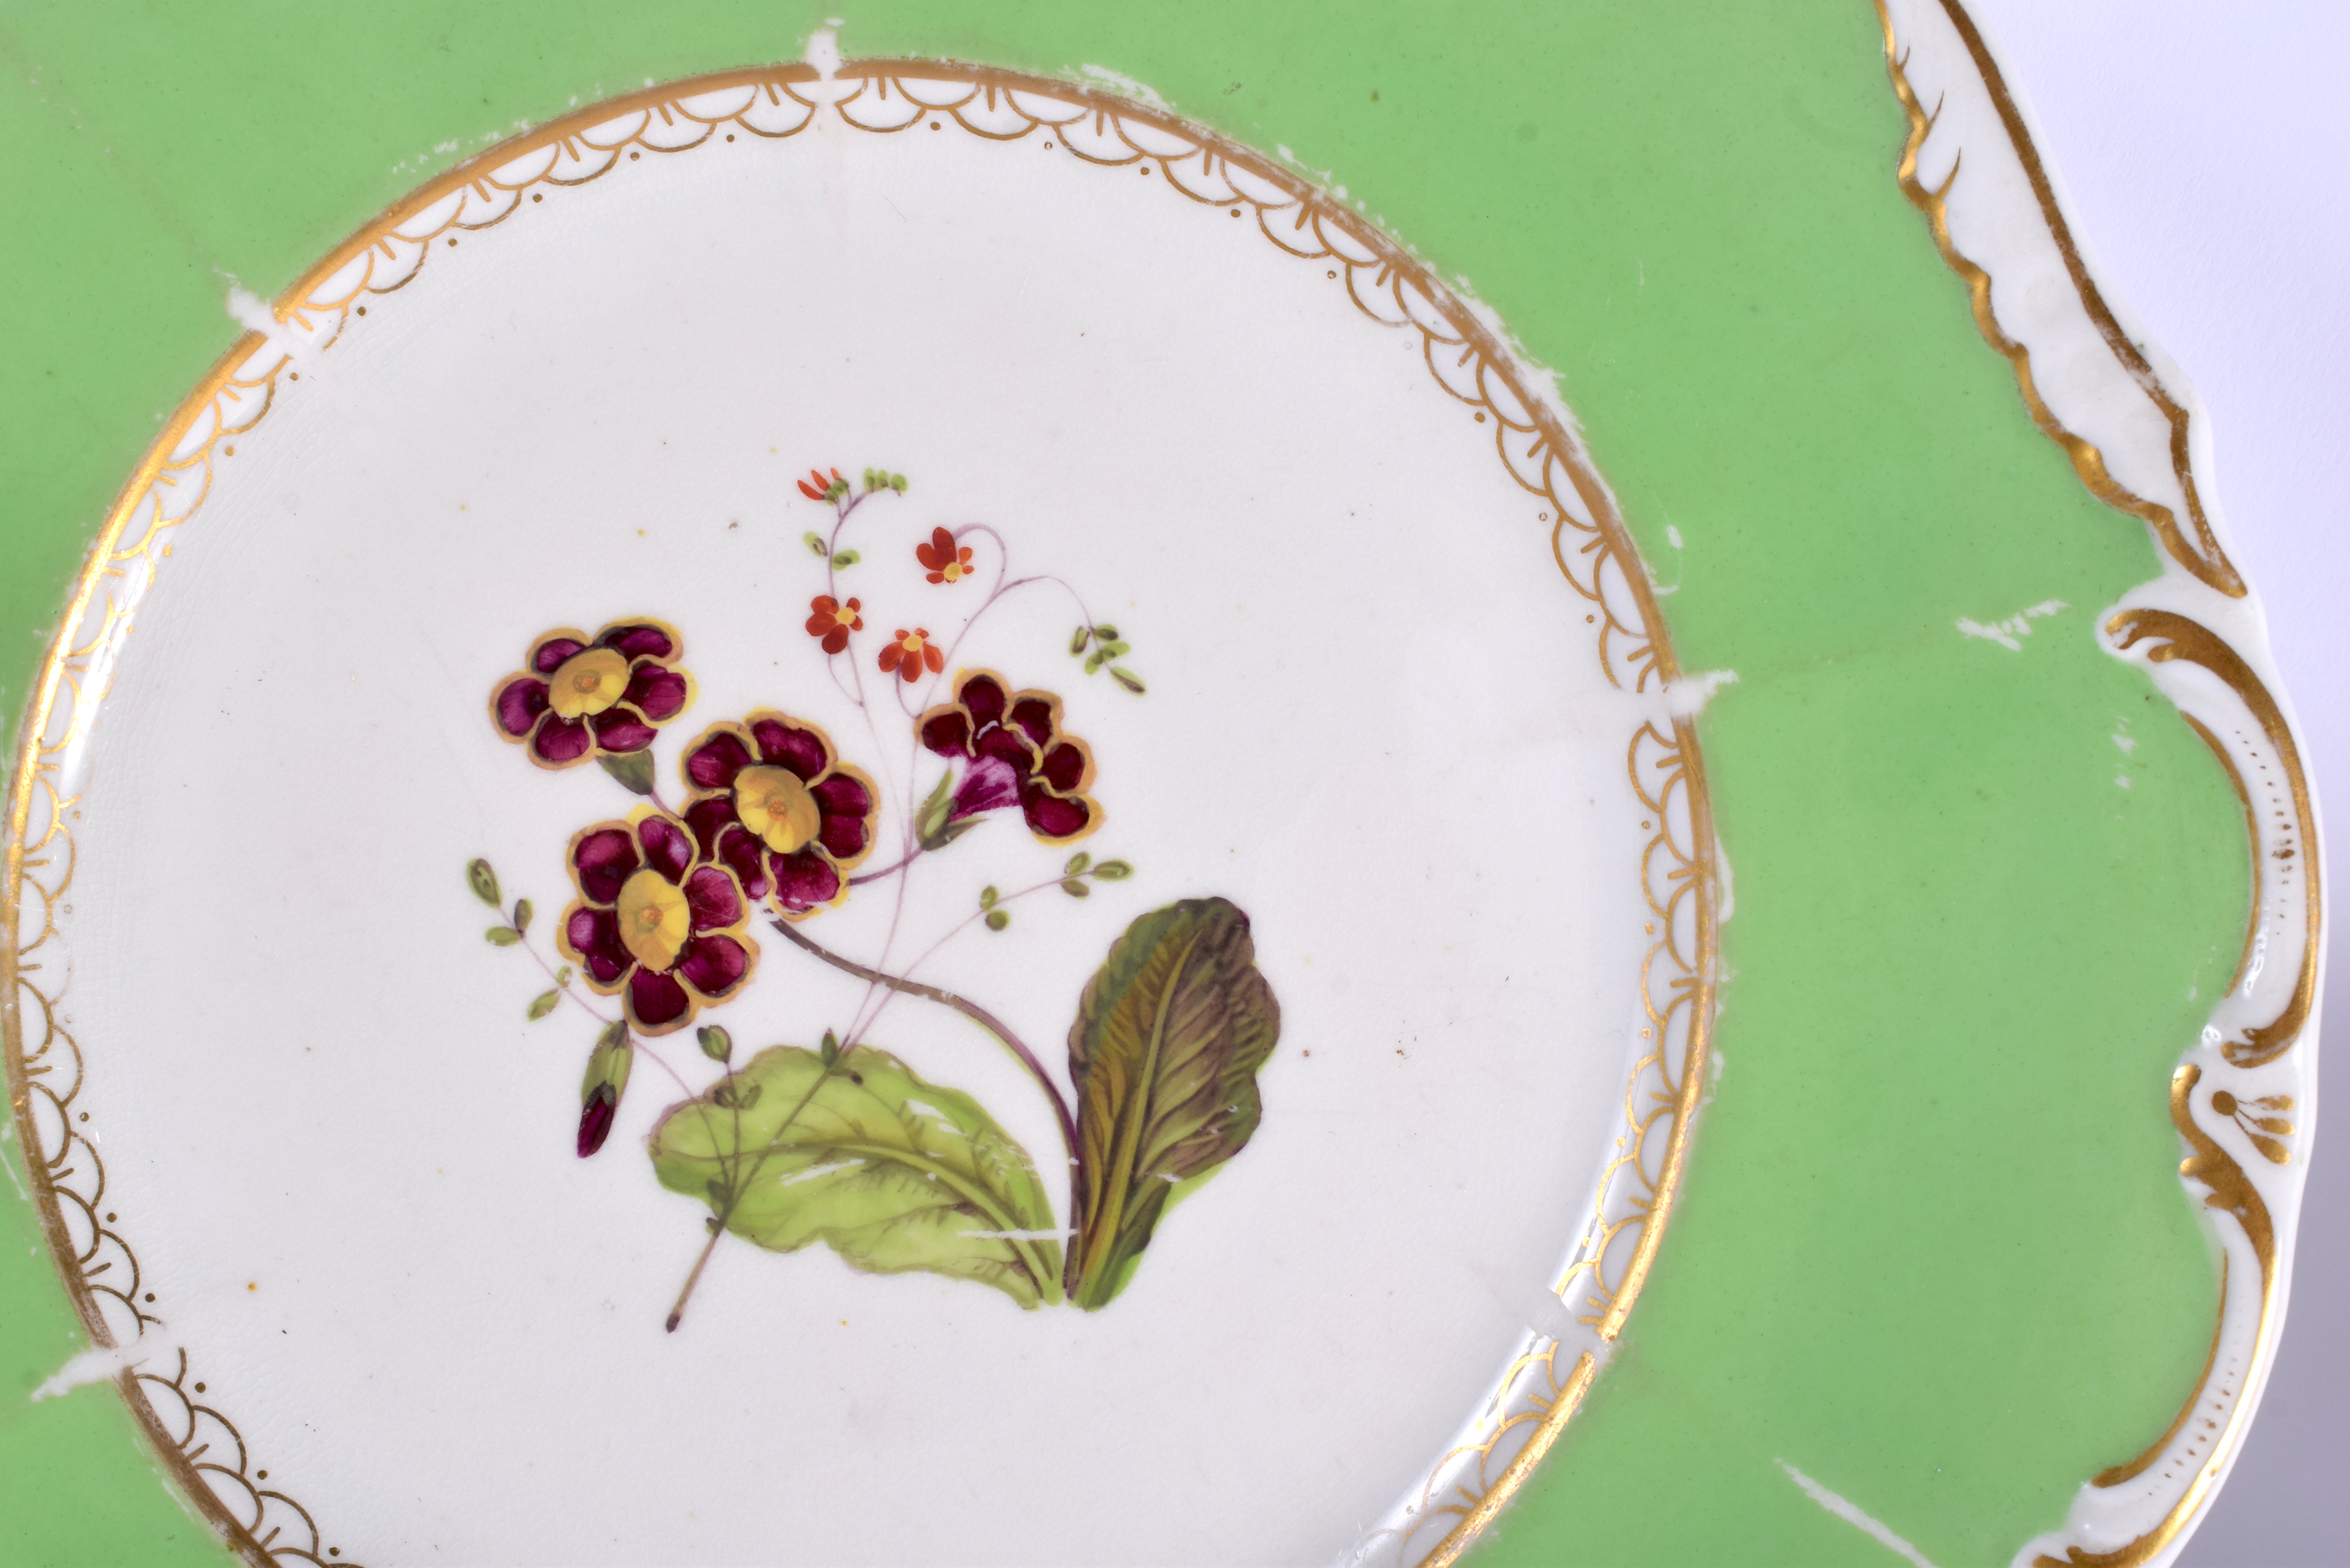 A PAIR OF EARLY 19TH CENTURY DERBY PORCELAIN PLATES painted with flowers under an apple green border - Image 3 of 5